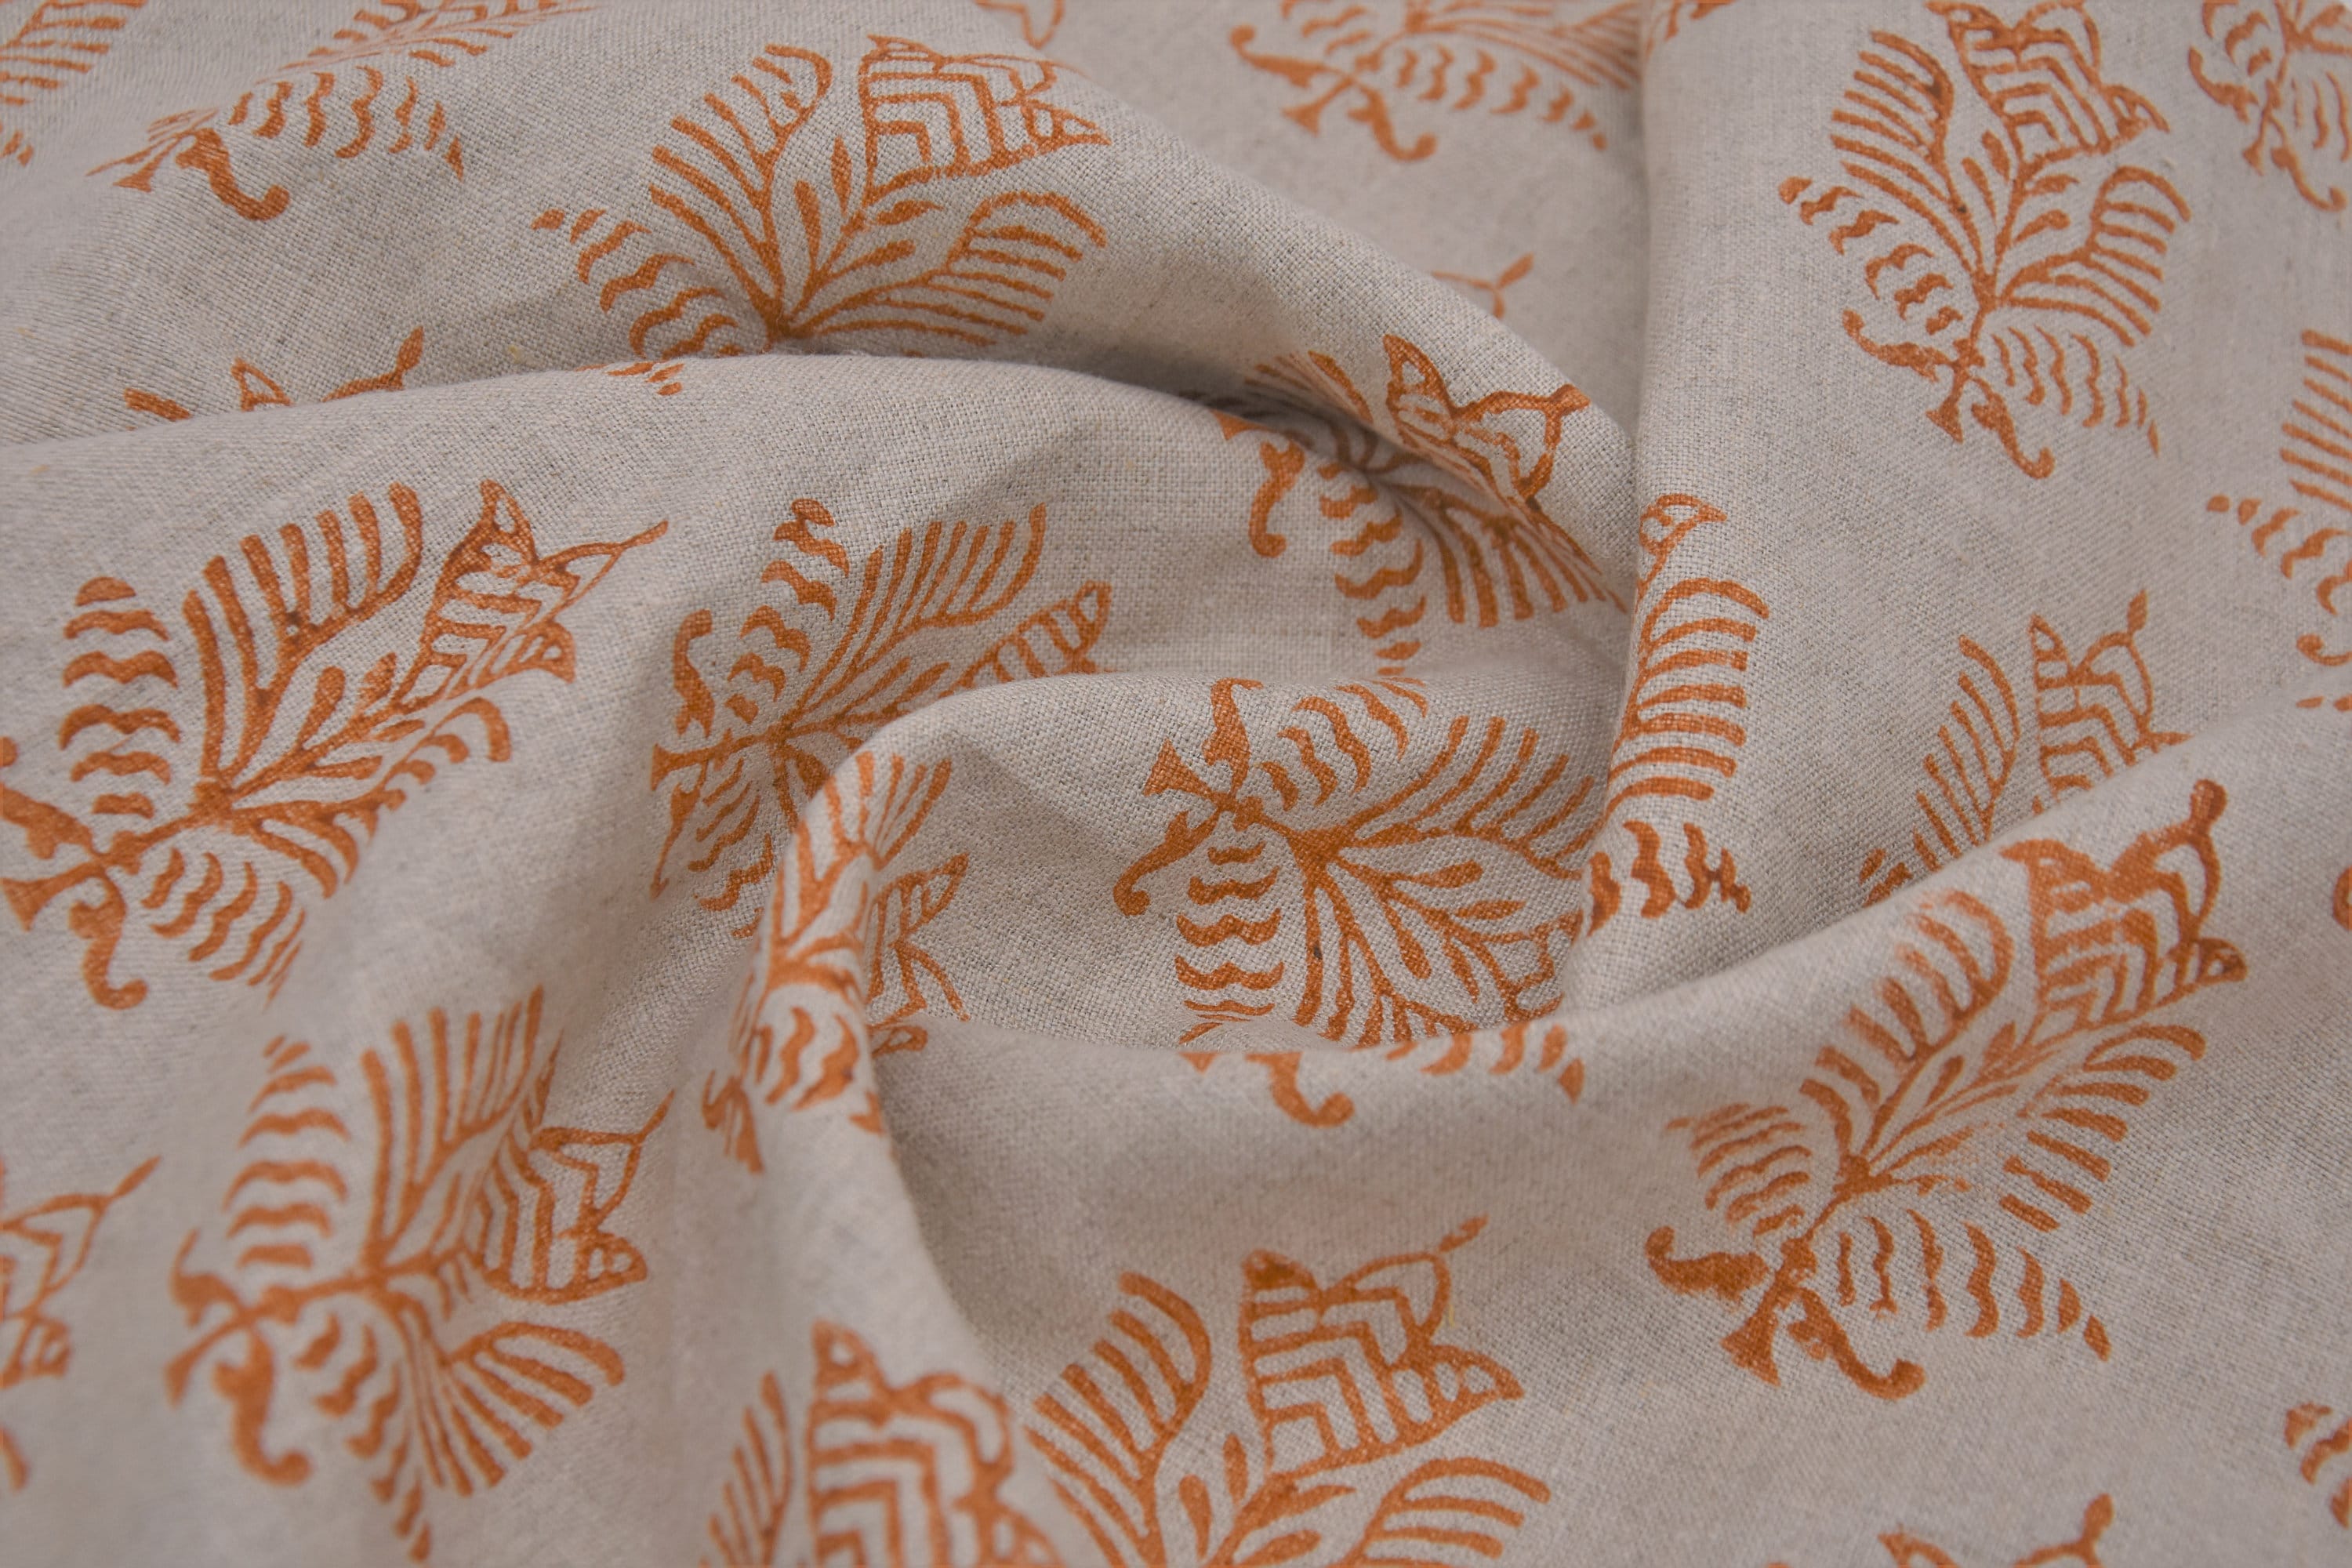 Block Print Handloom Pure Linen 58" Wide indian Fabric, Upholstery, Pillow Cover, Curtains, fabric by yards - Moutjza